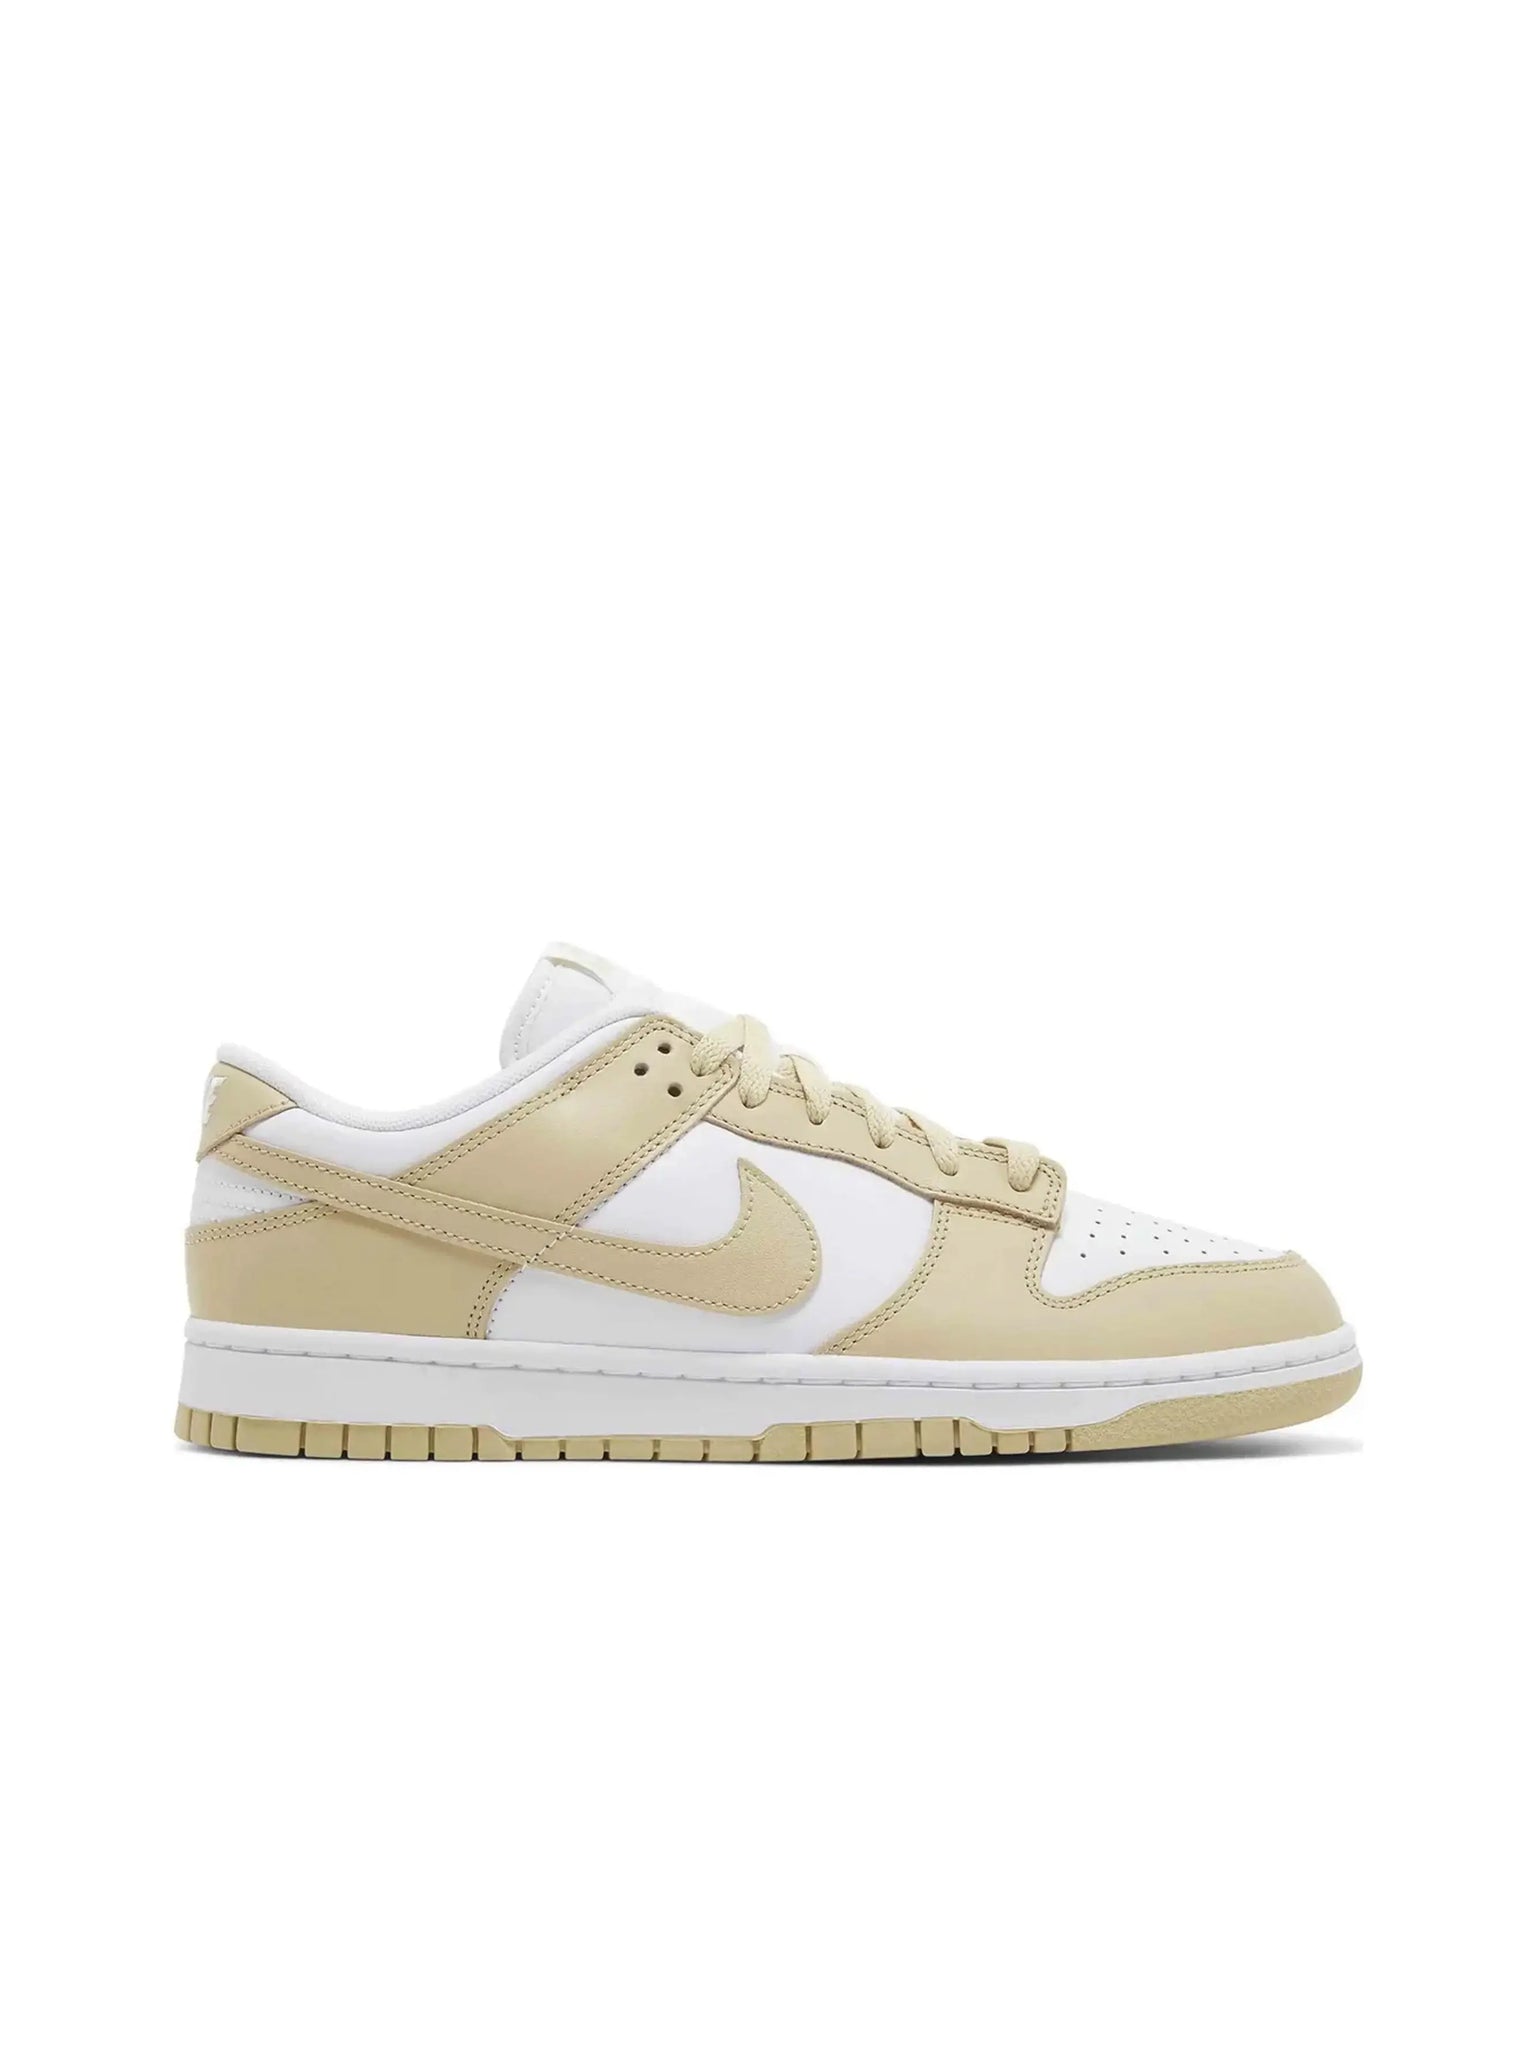 Nike Dunk Low Team Gold in Auckland, New Zealand - Shop name